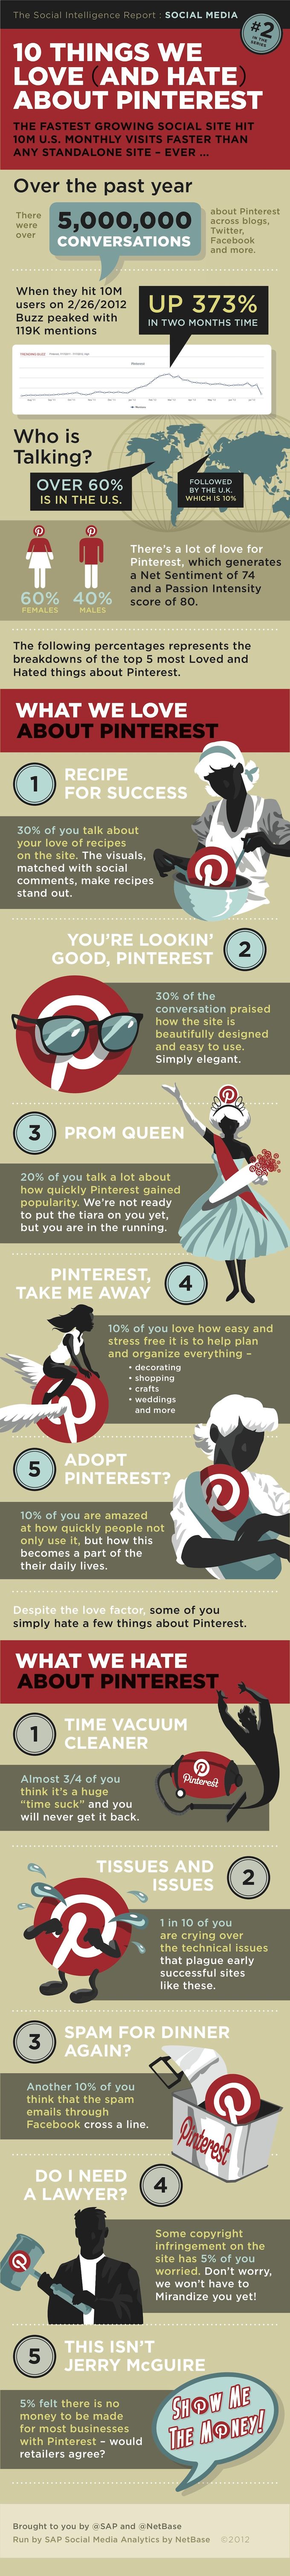 10 things people love and hate about Pinterest